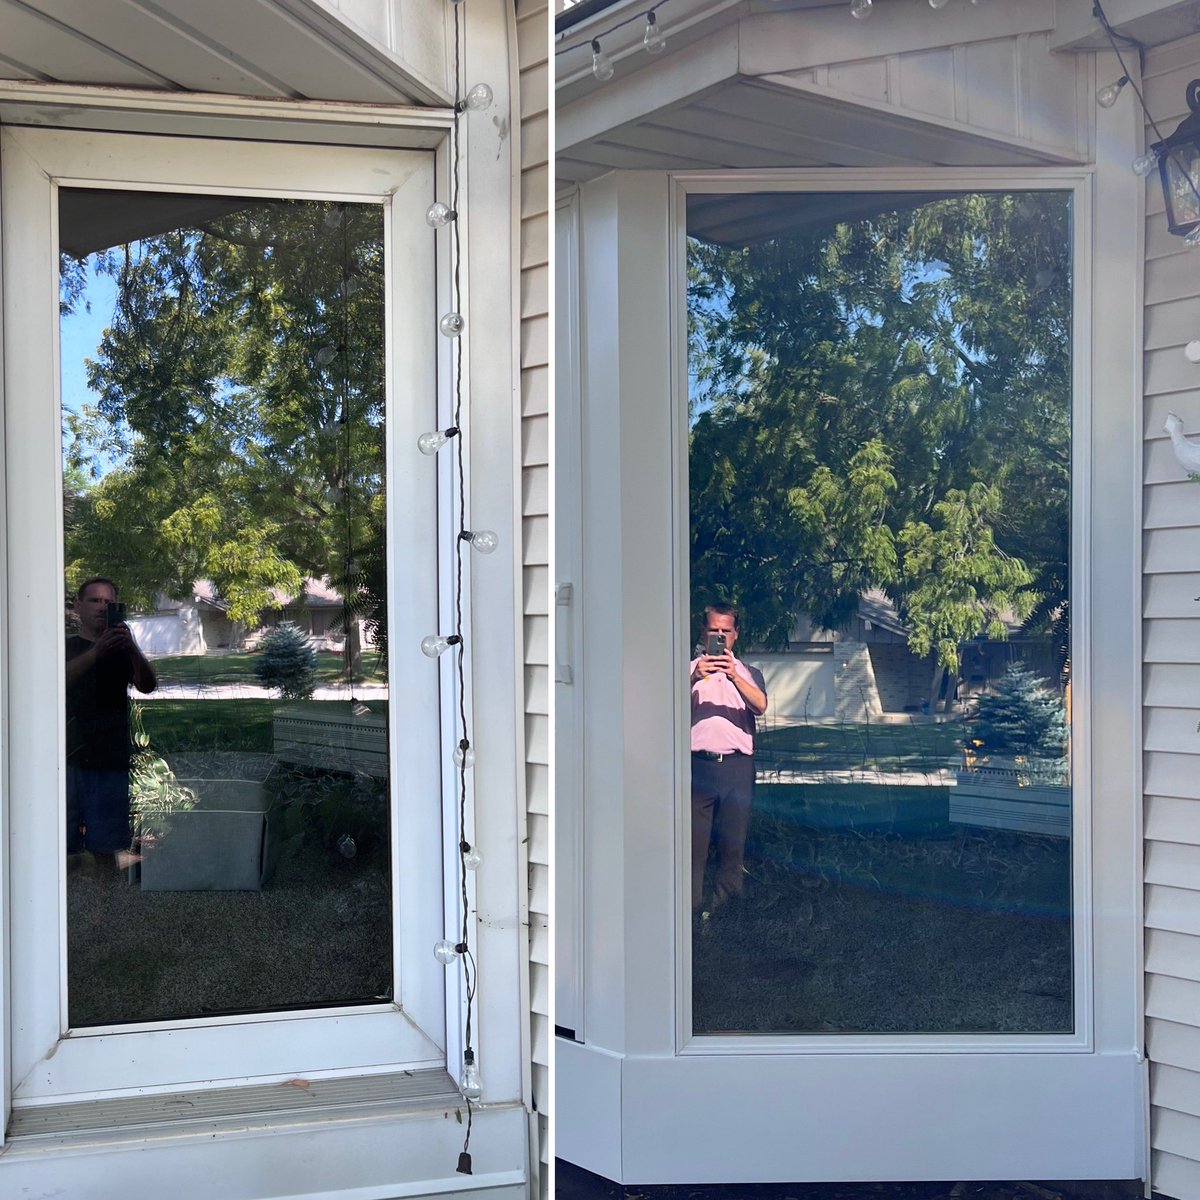 Talking about our @620wtmj partners @PellaWisconsin this morning on Wisconsin’s Morning News… so here’s the visual. Look at how much more glass we gained on the side windows next to the new patio door, and my wife super loves the white finish.